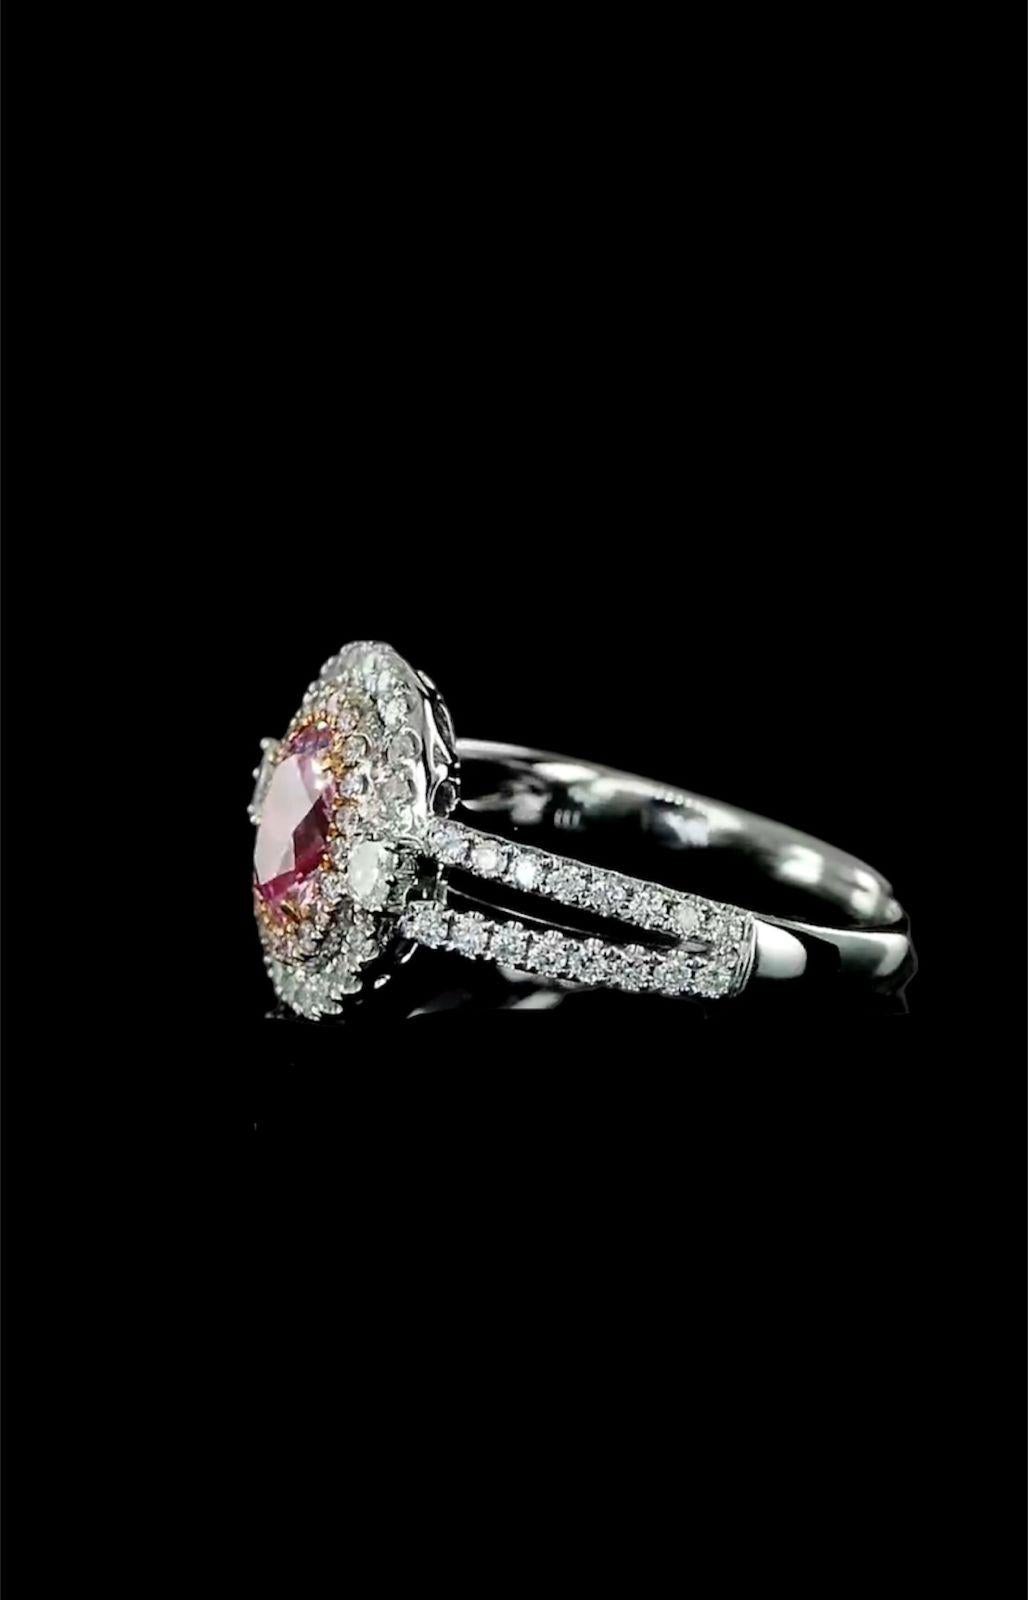 GIA Certified 0.70 Carat Faint Pinkish Brown Diamond Ring VS1 Clarity For Sale 5